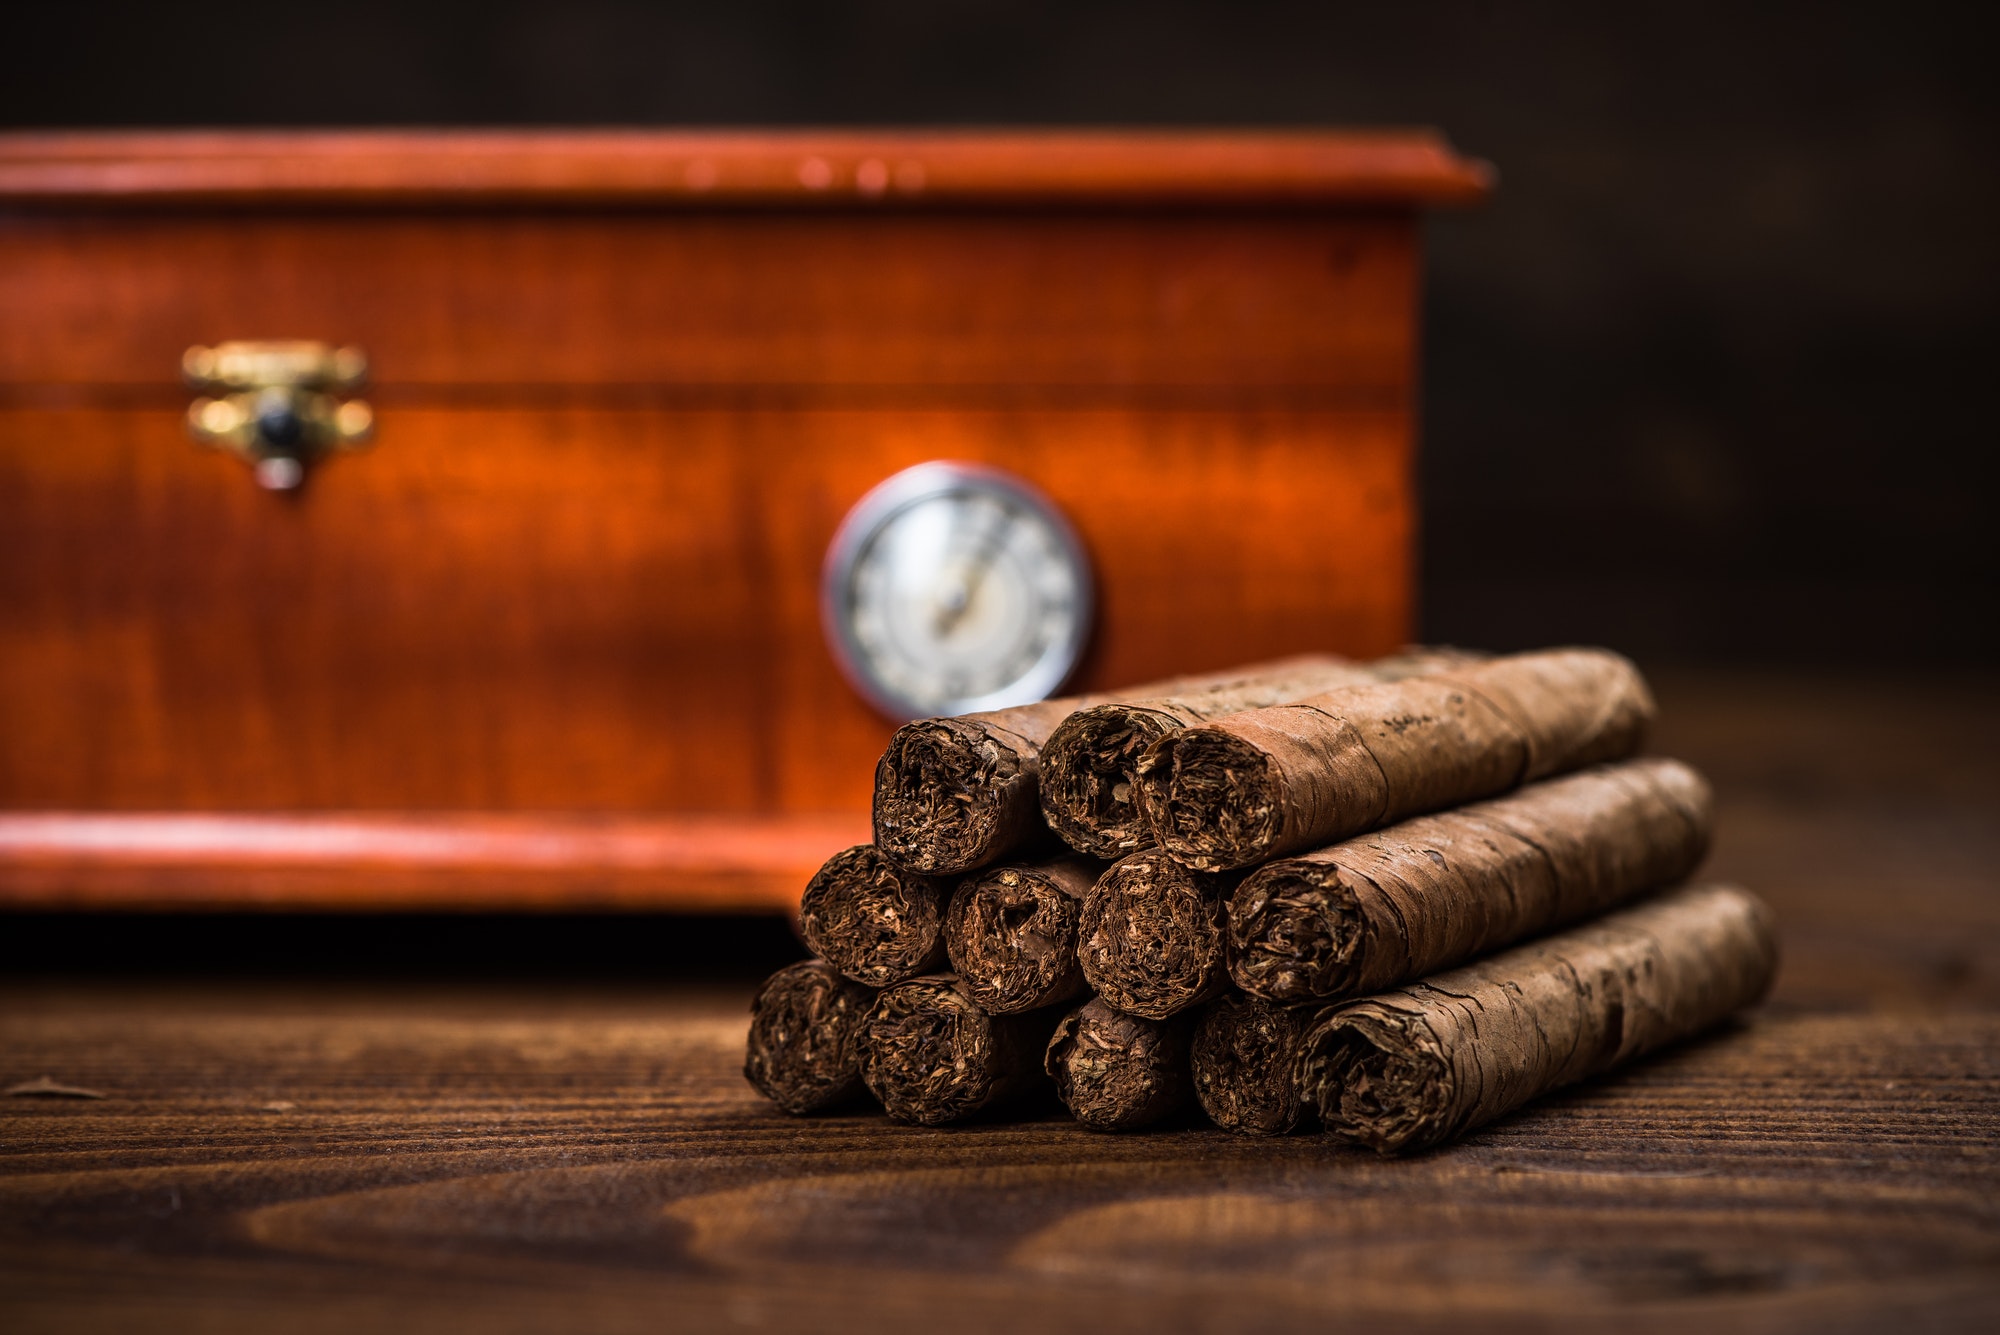 Cuban cigars with humidor in background